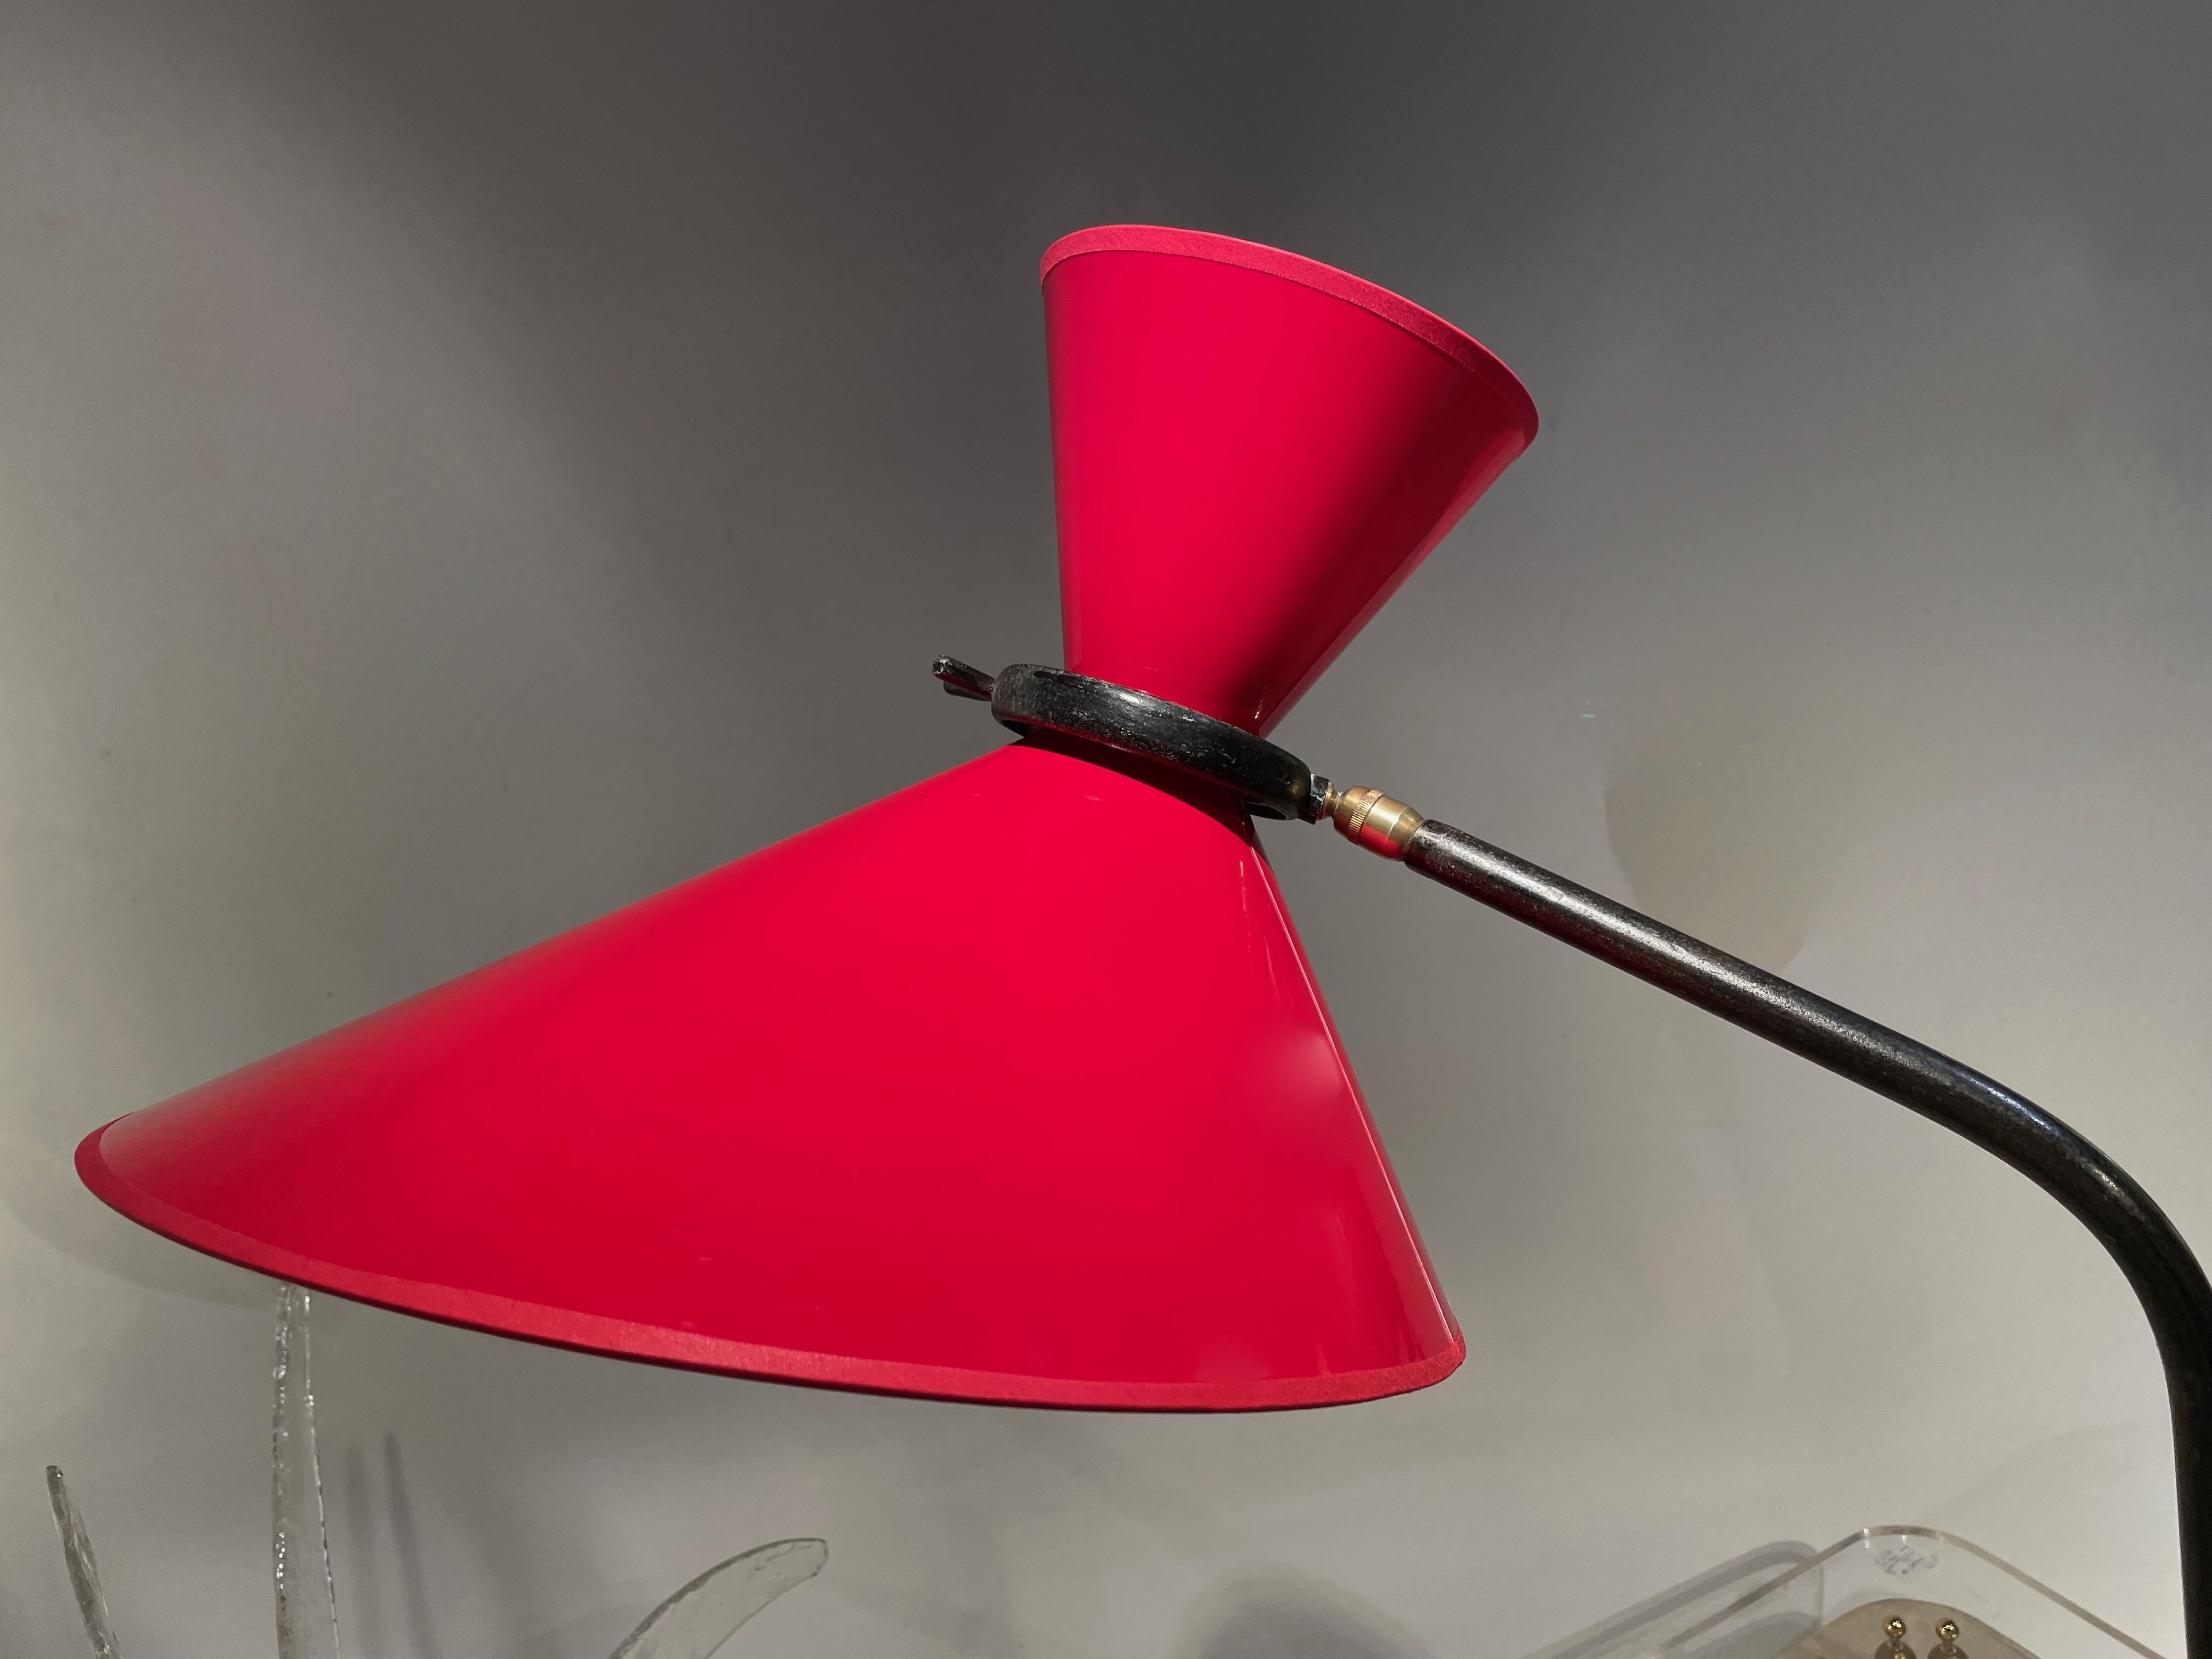 50's Adjustable Floor Lamp With Red Diabolo Shade by Maison Lunel, France 1954. For Sale 2